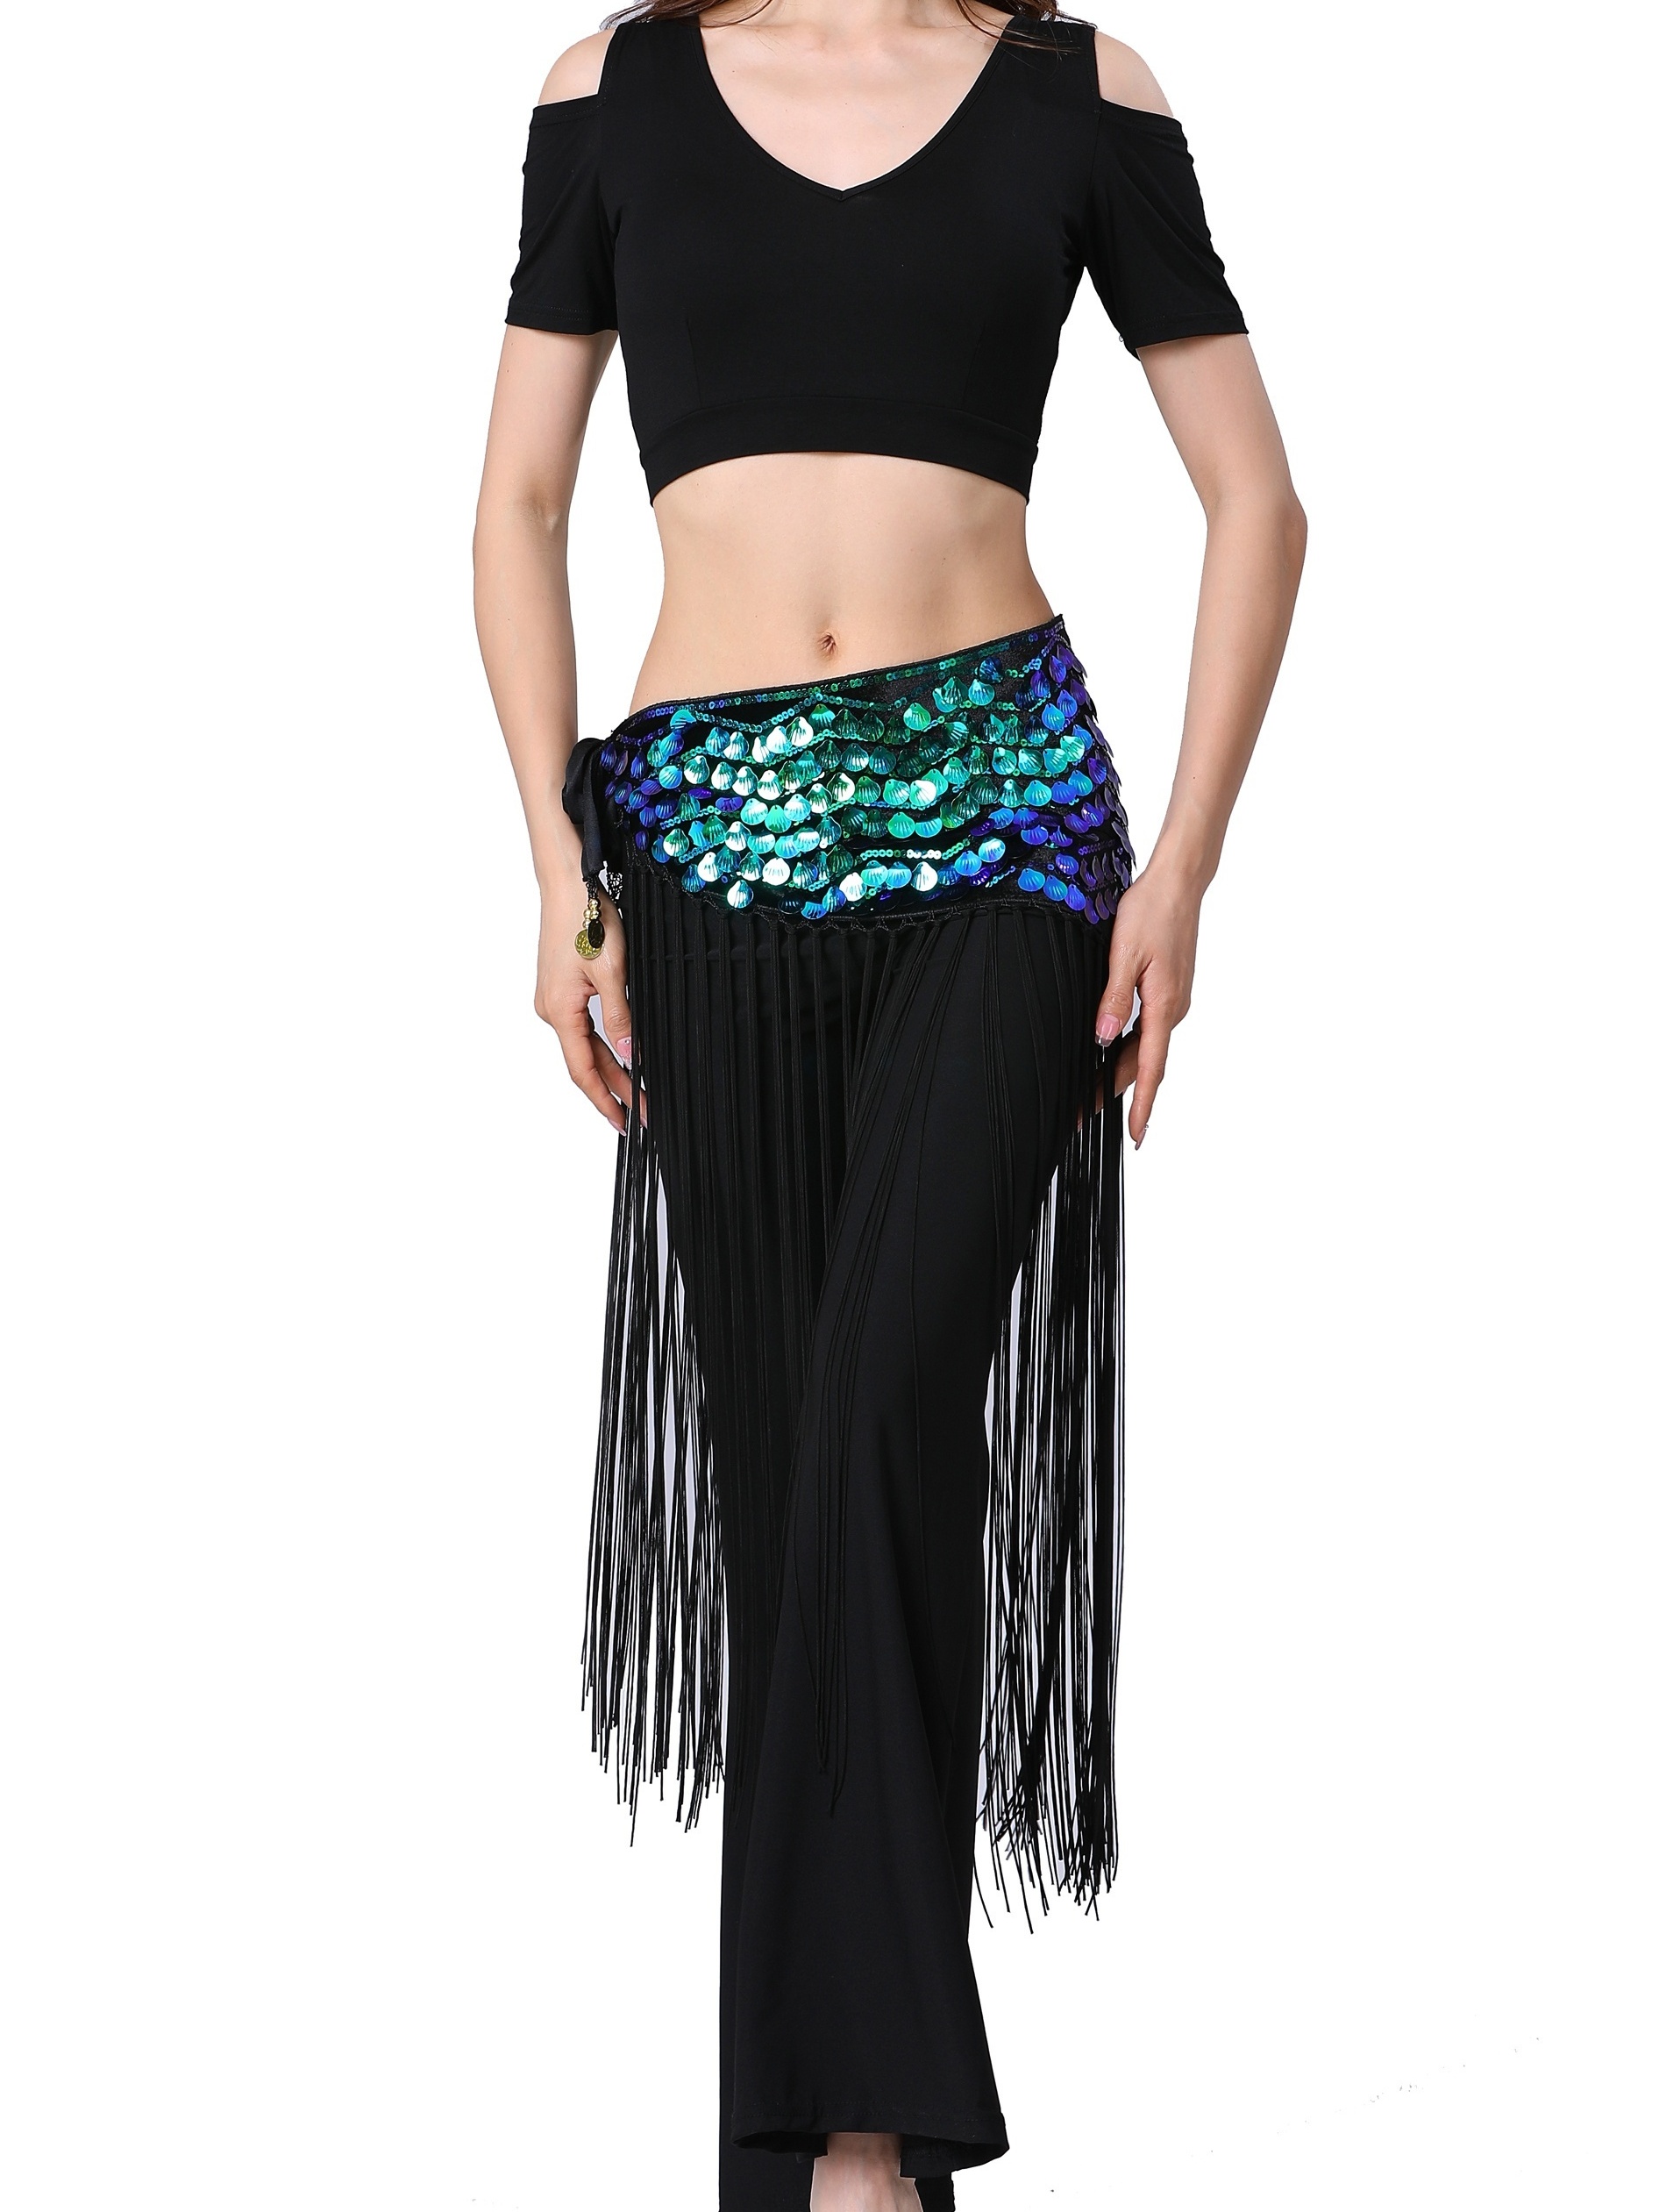 Women'Sequins Butterfly Crop Top Club Tribal Outfits Dance Wear Glitter Bra  Tops for Halloween Rave Party Festival